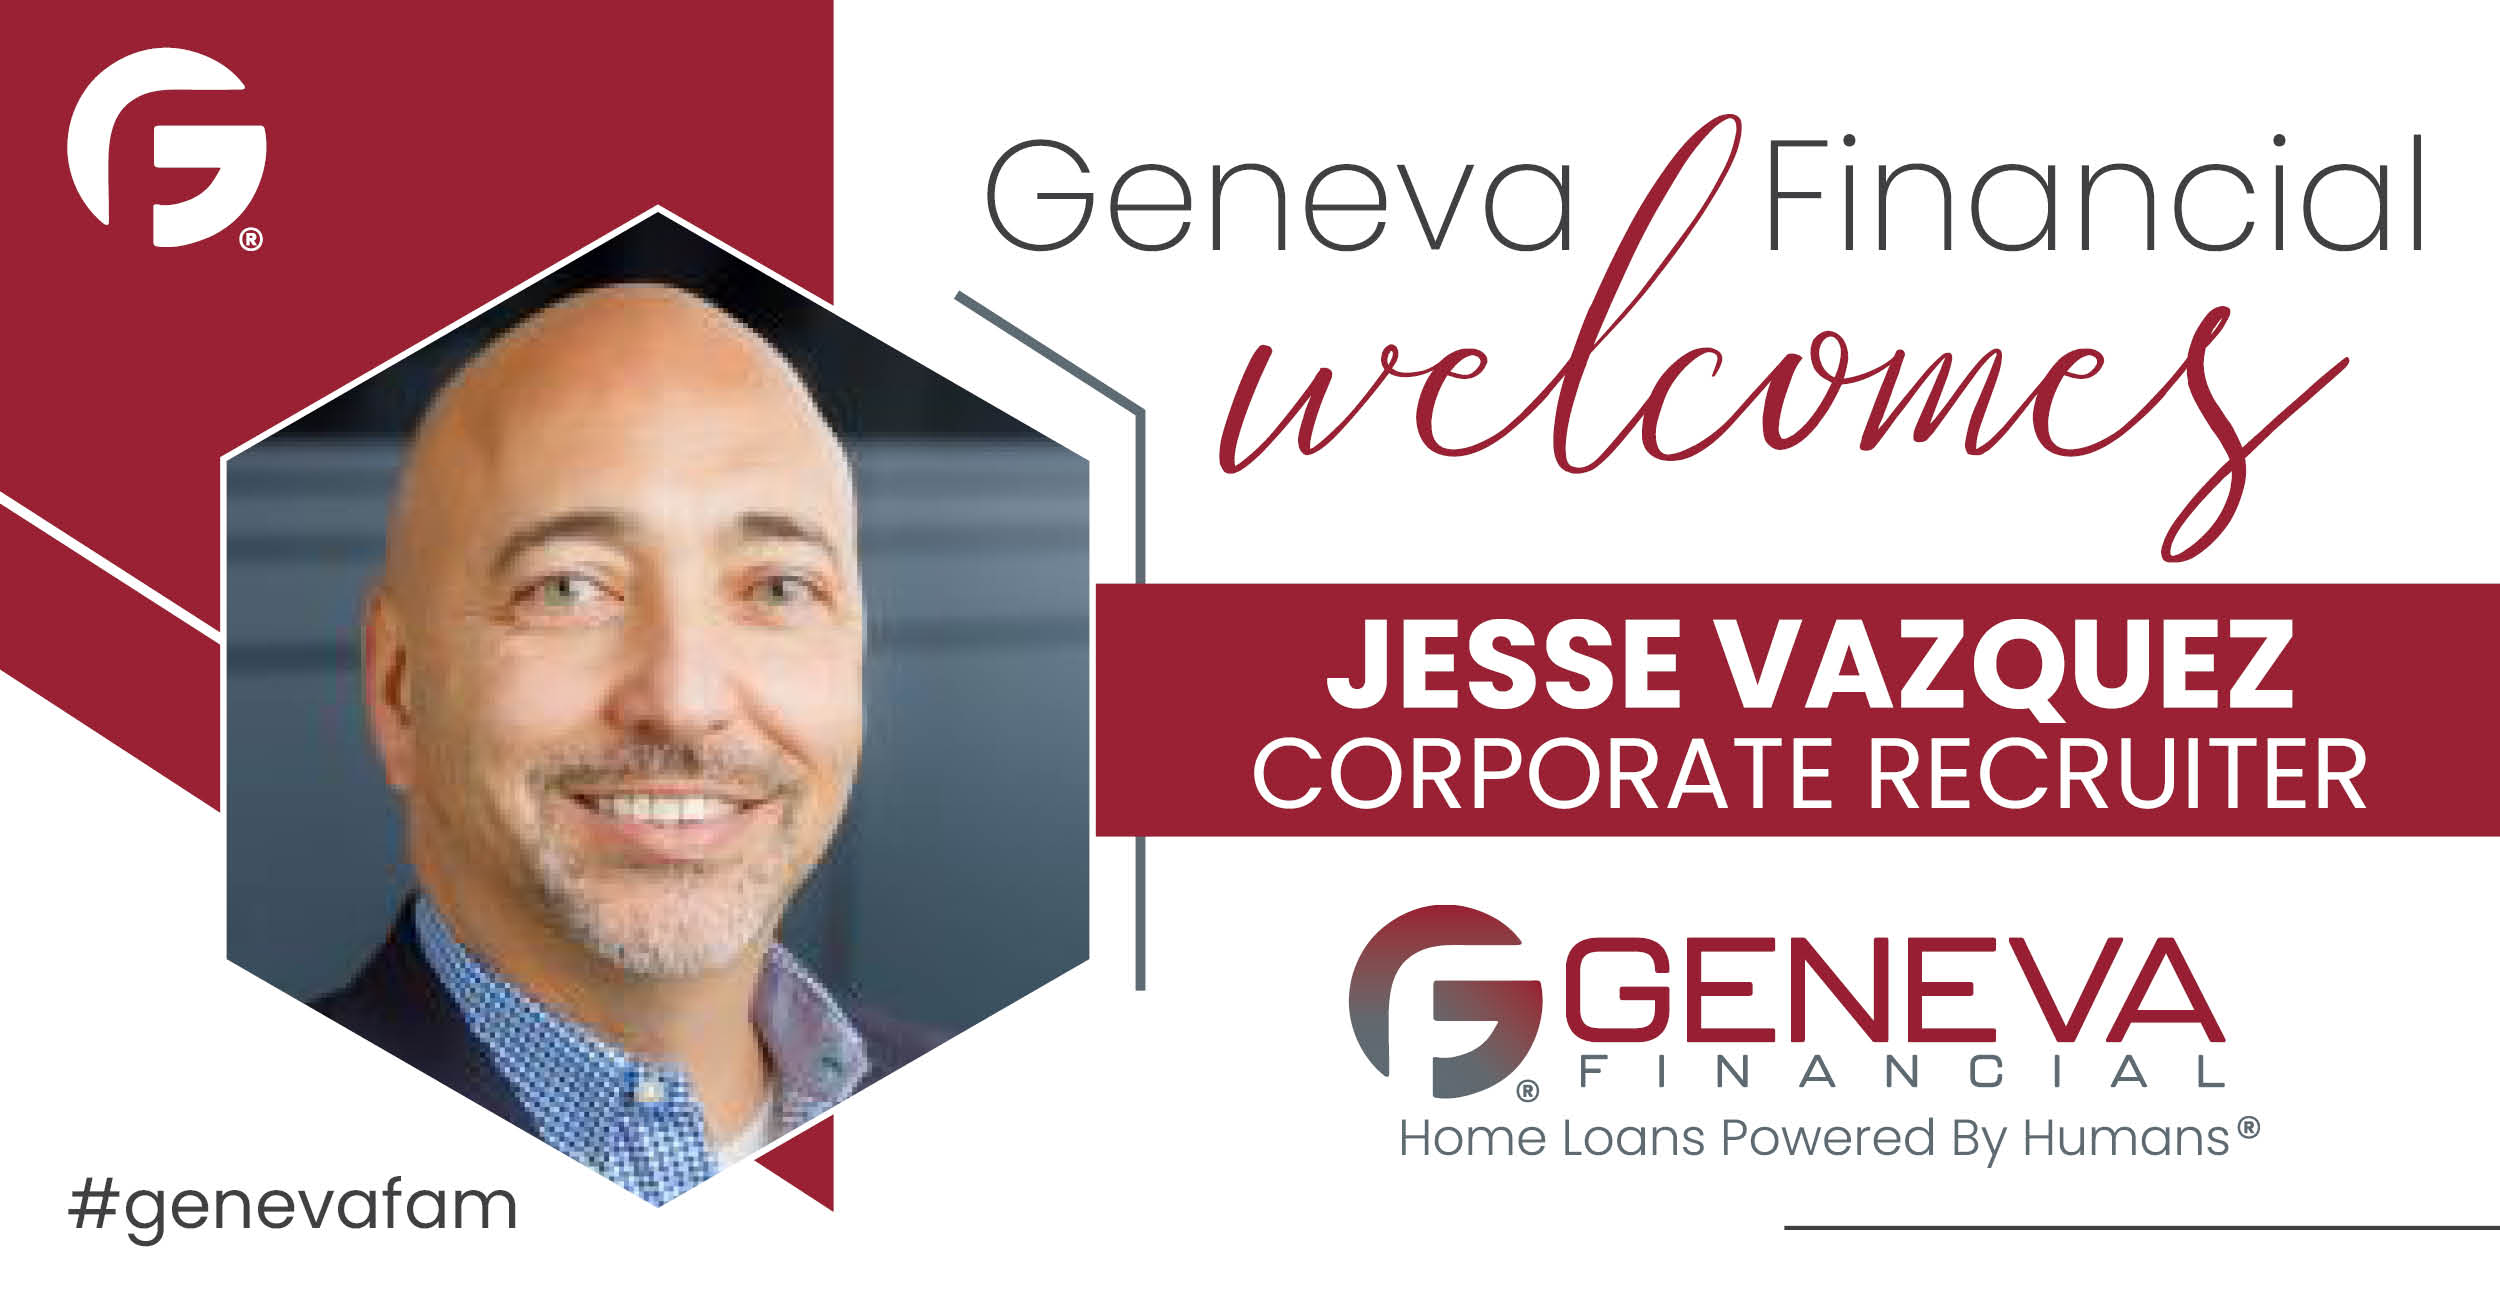 Geneva Financial Welcomes New Recruiter Jesse Vazquez to Geneva Corporate, Chandler, AZ – Home Loans Powered by Humans®.